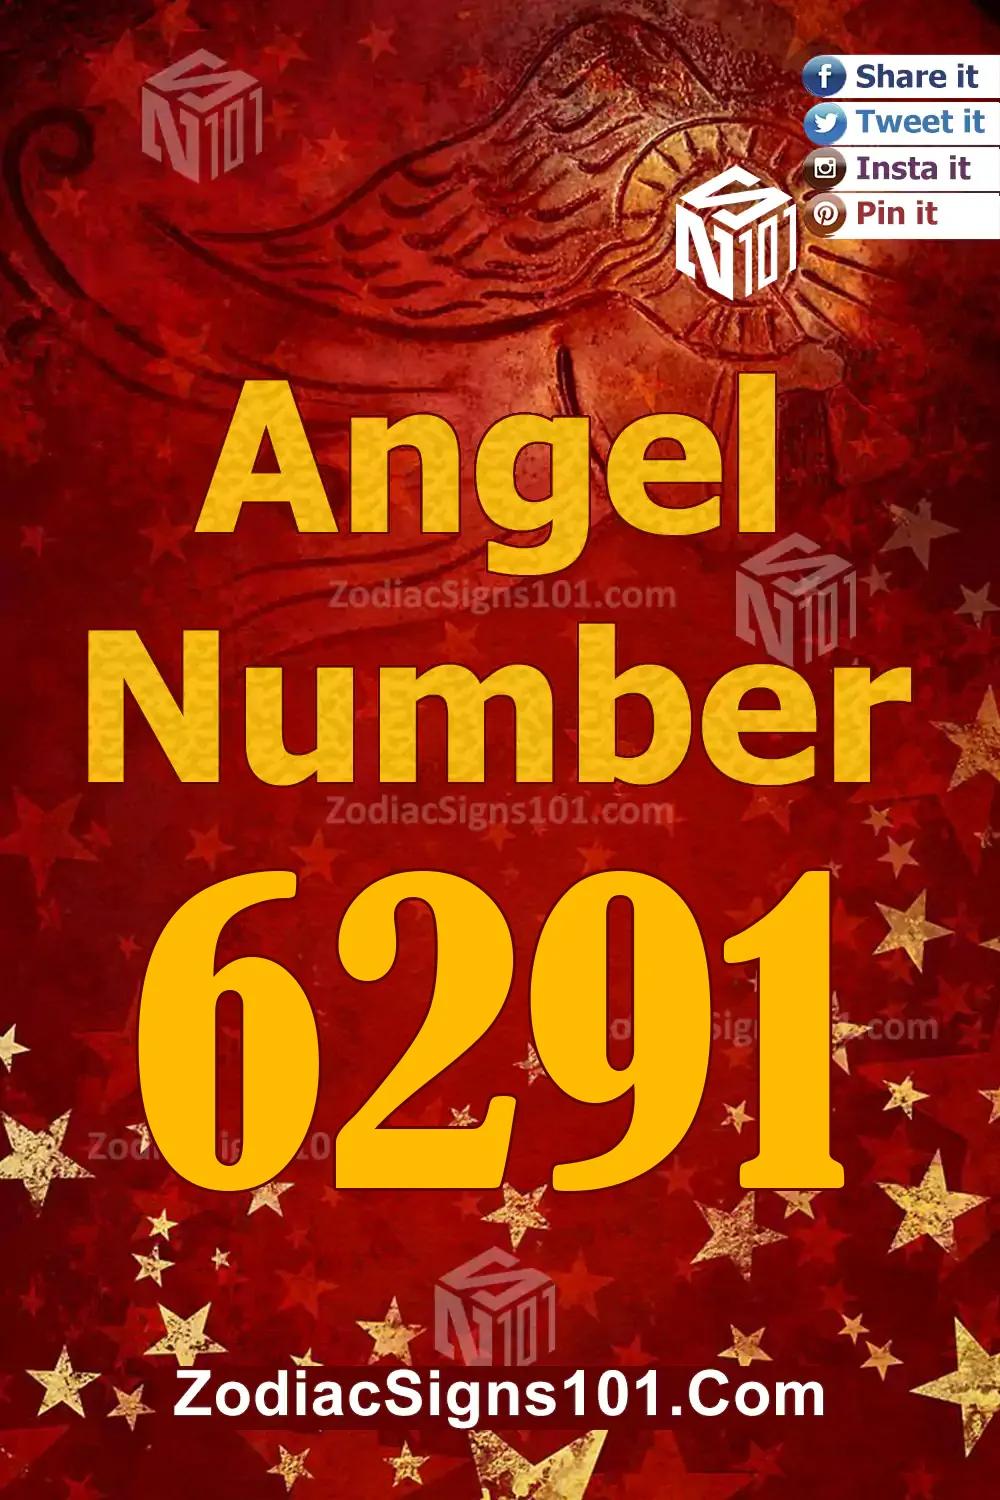 6291 Angel Number Meaning